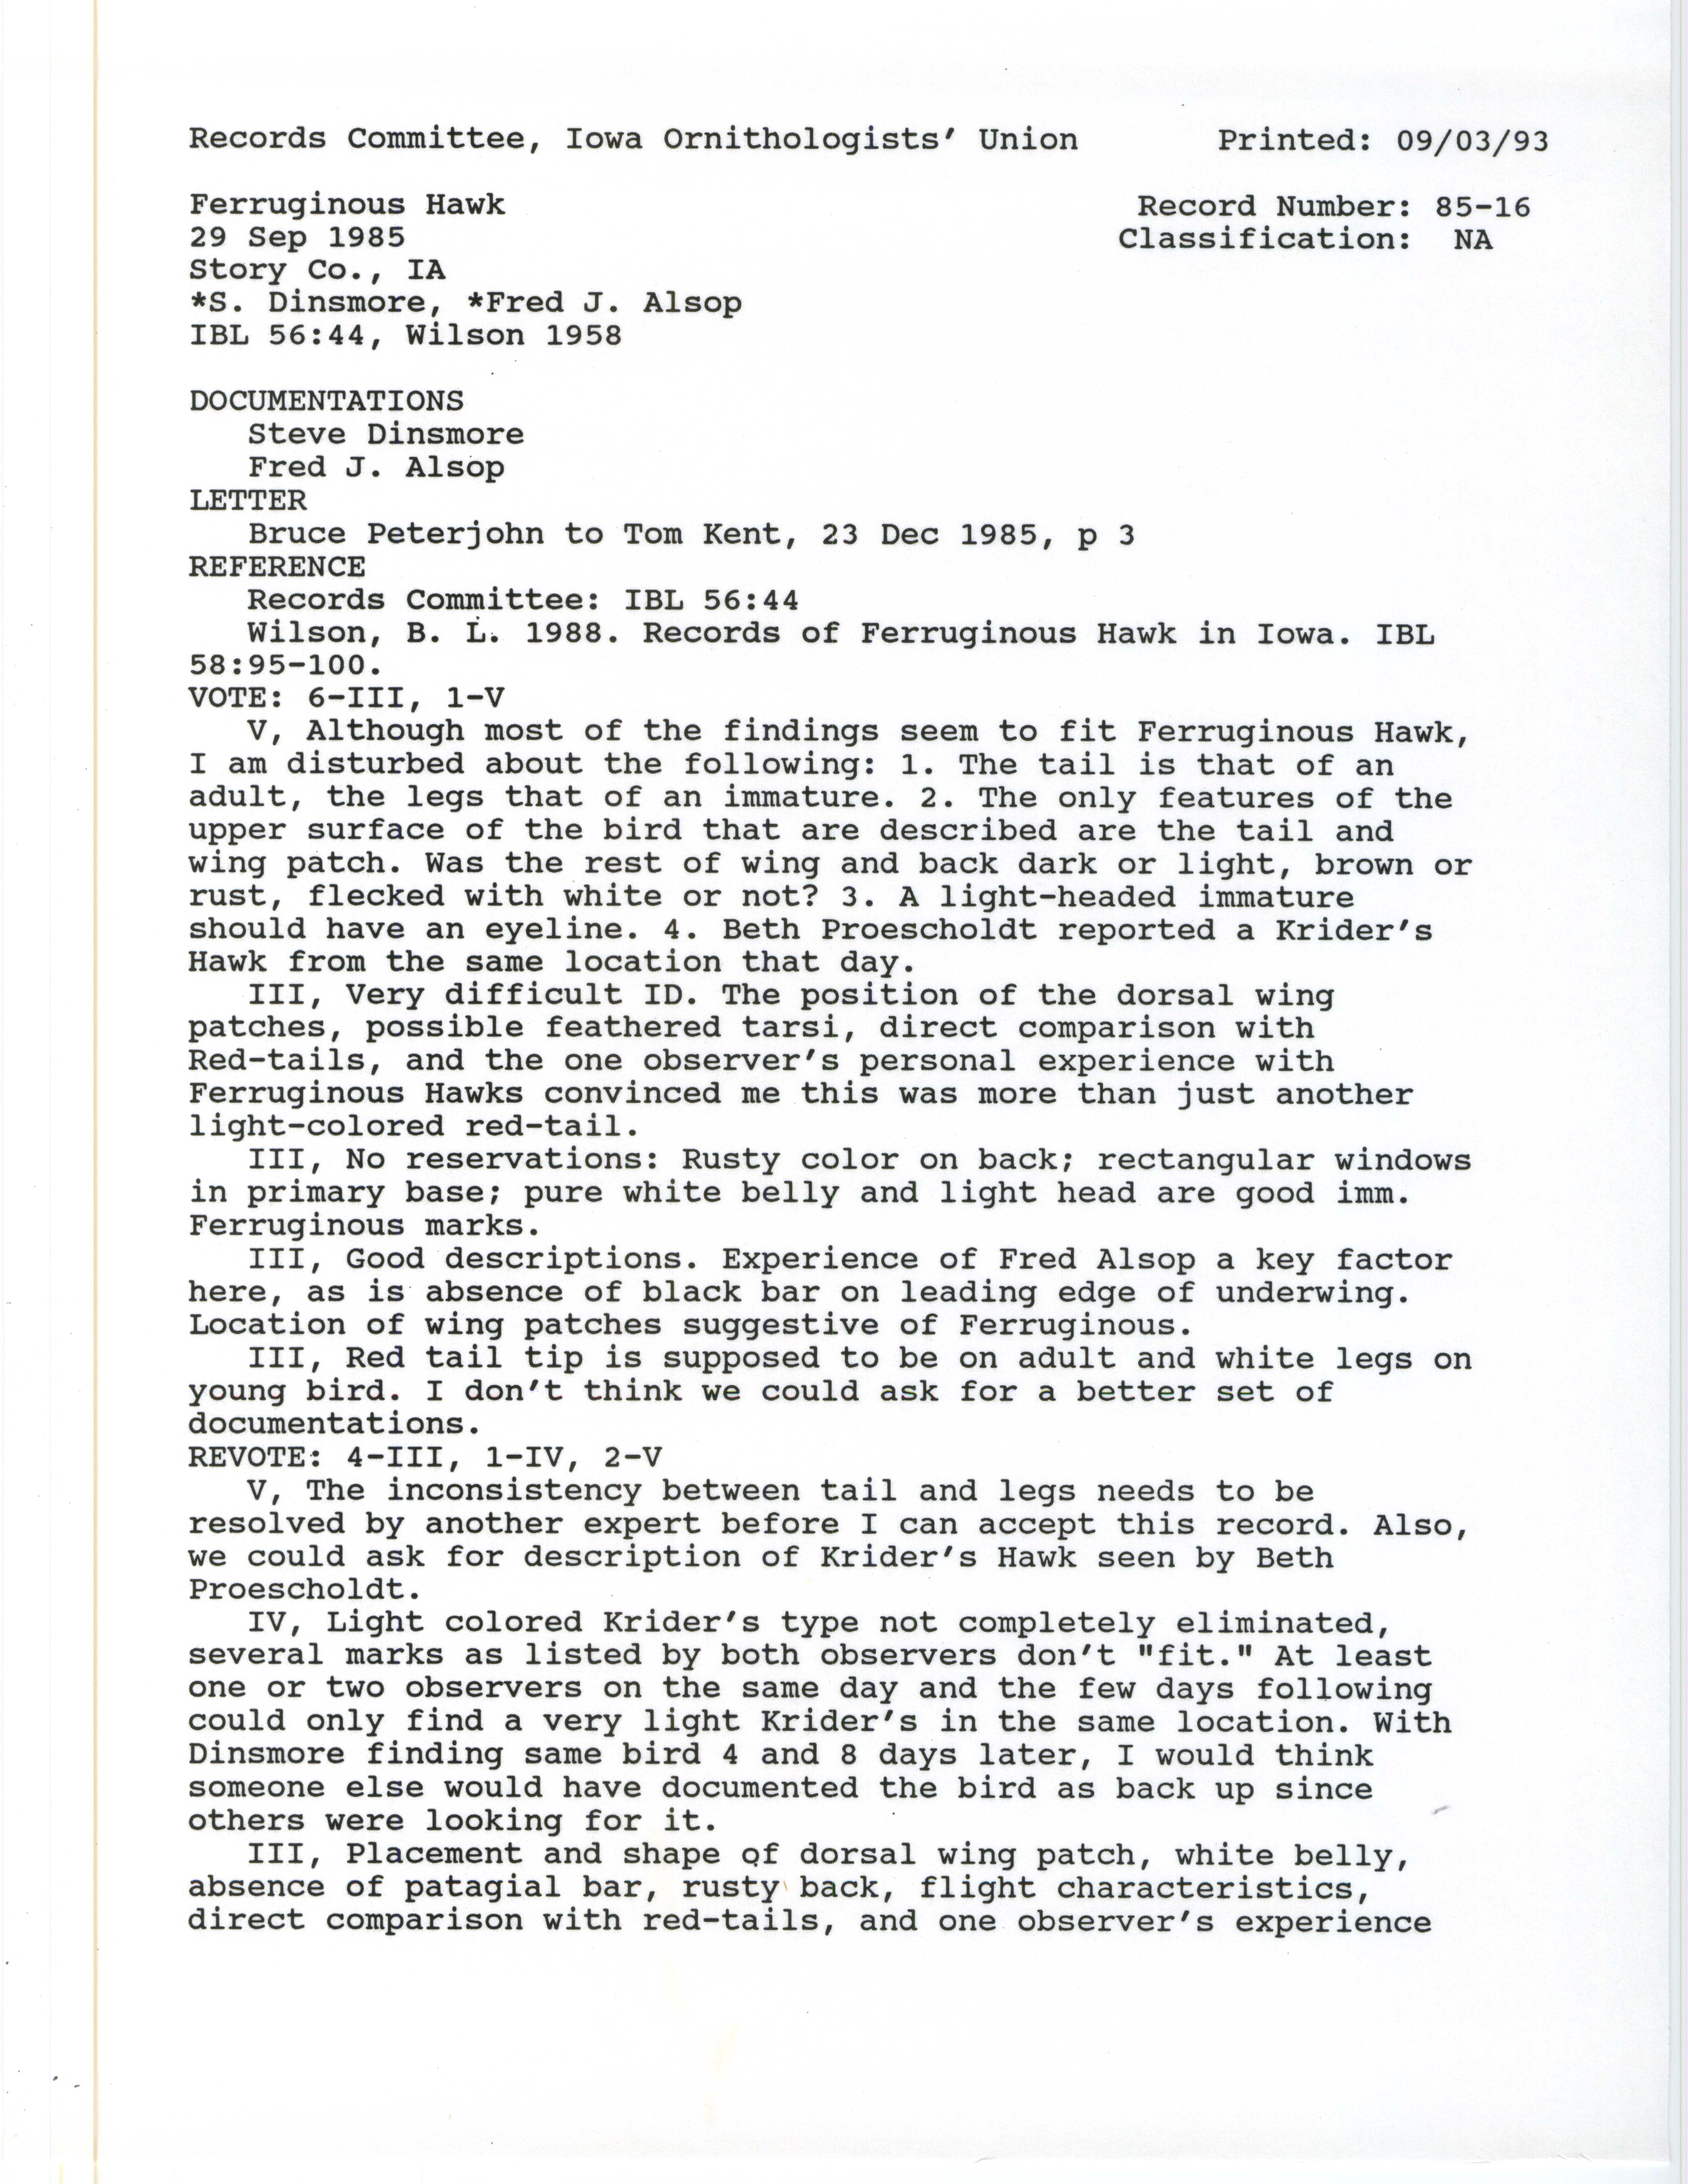 Records Committee review for rare bird sighting of Ferruginous Hawk in Story County, 1985